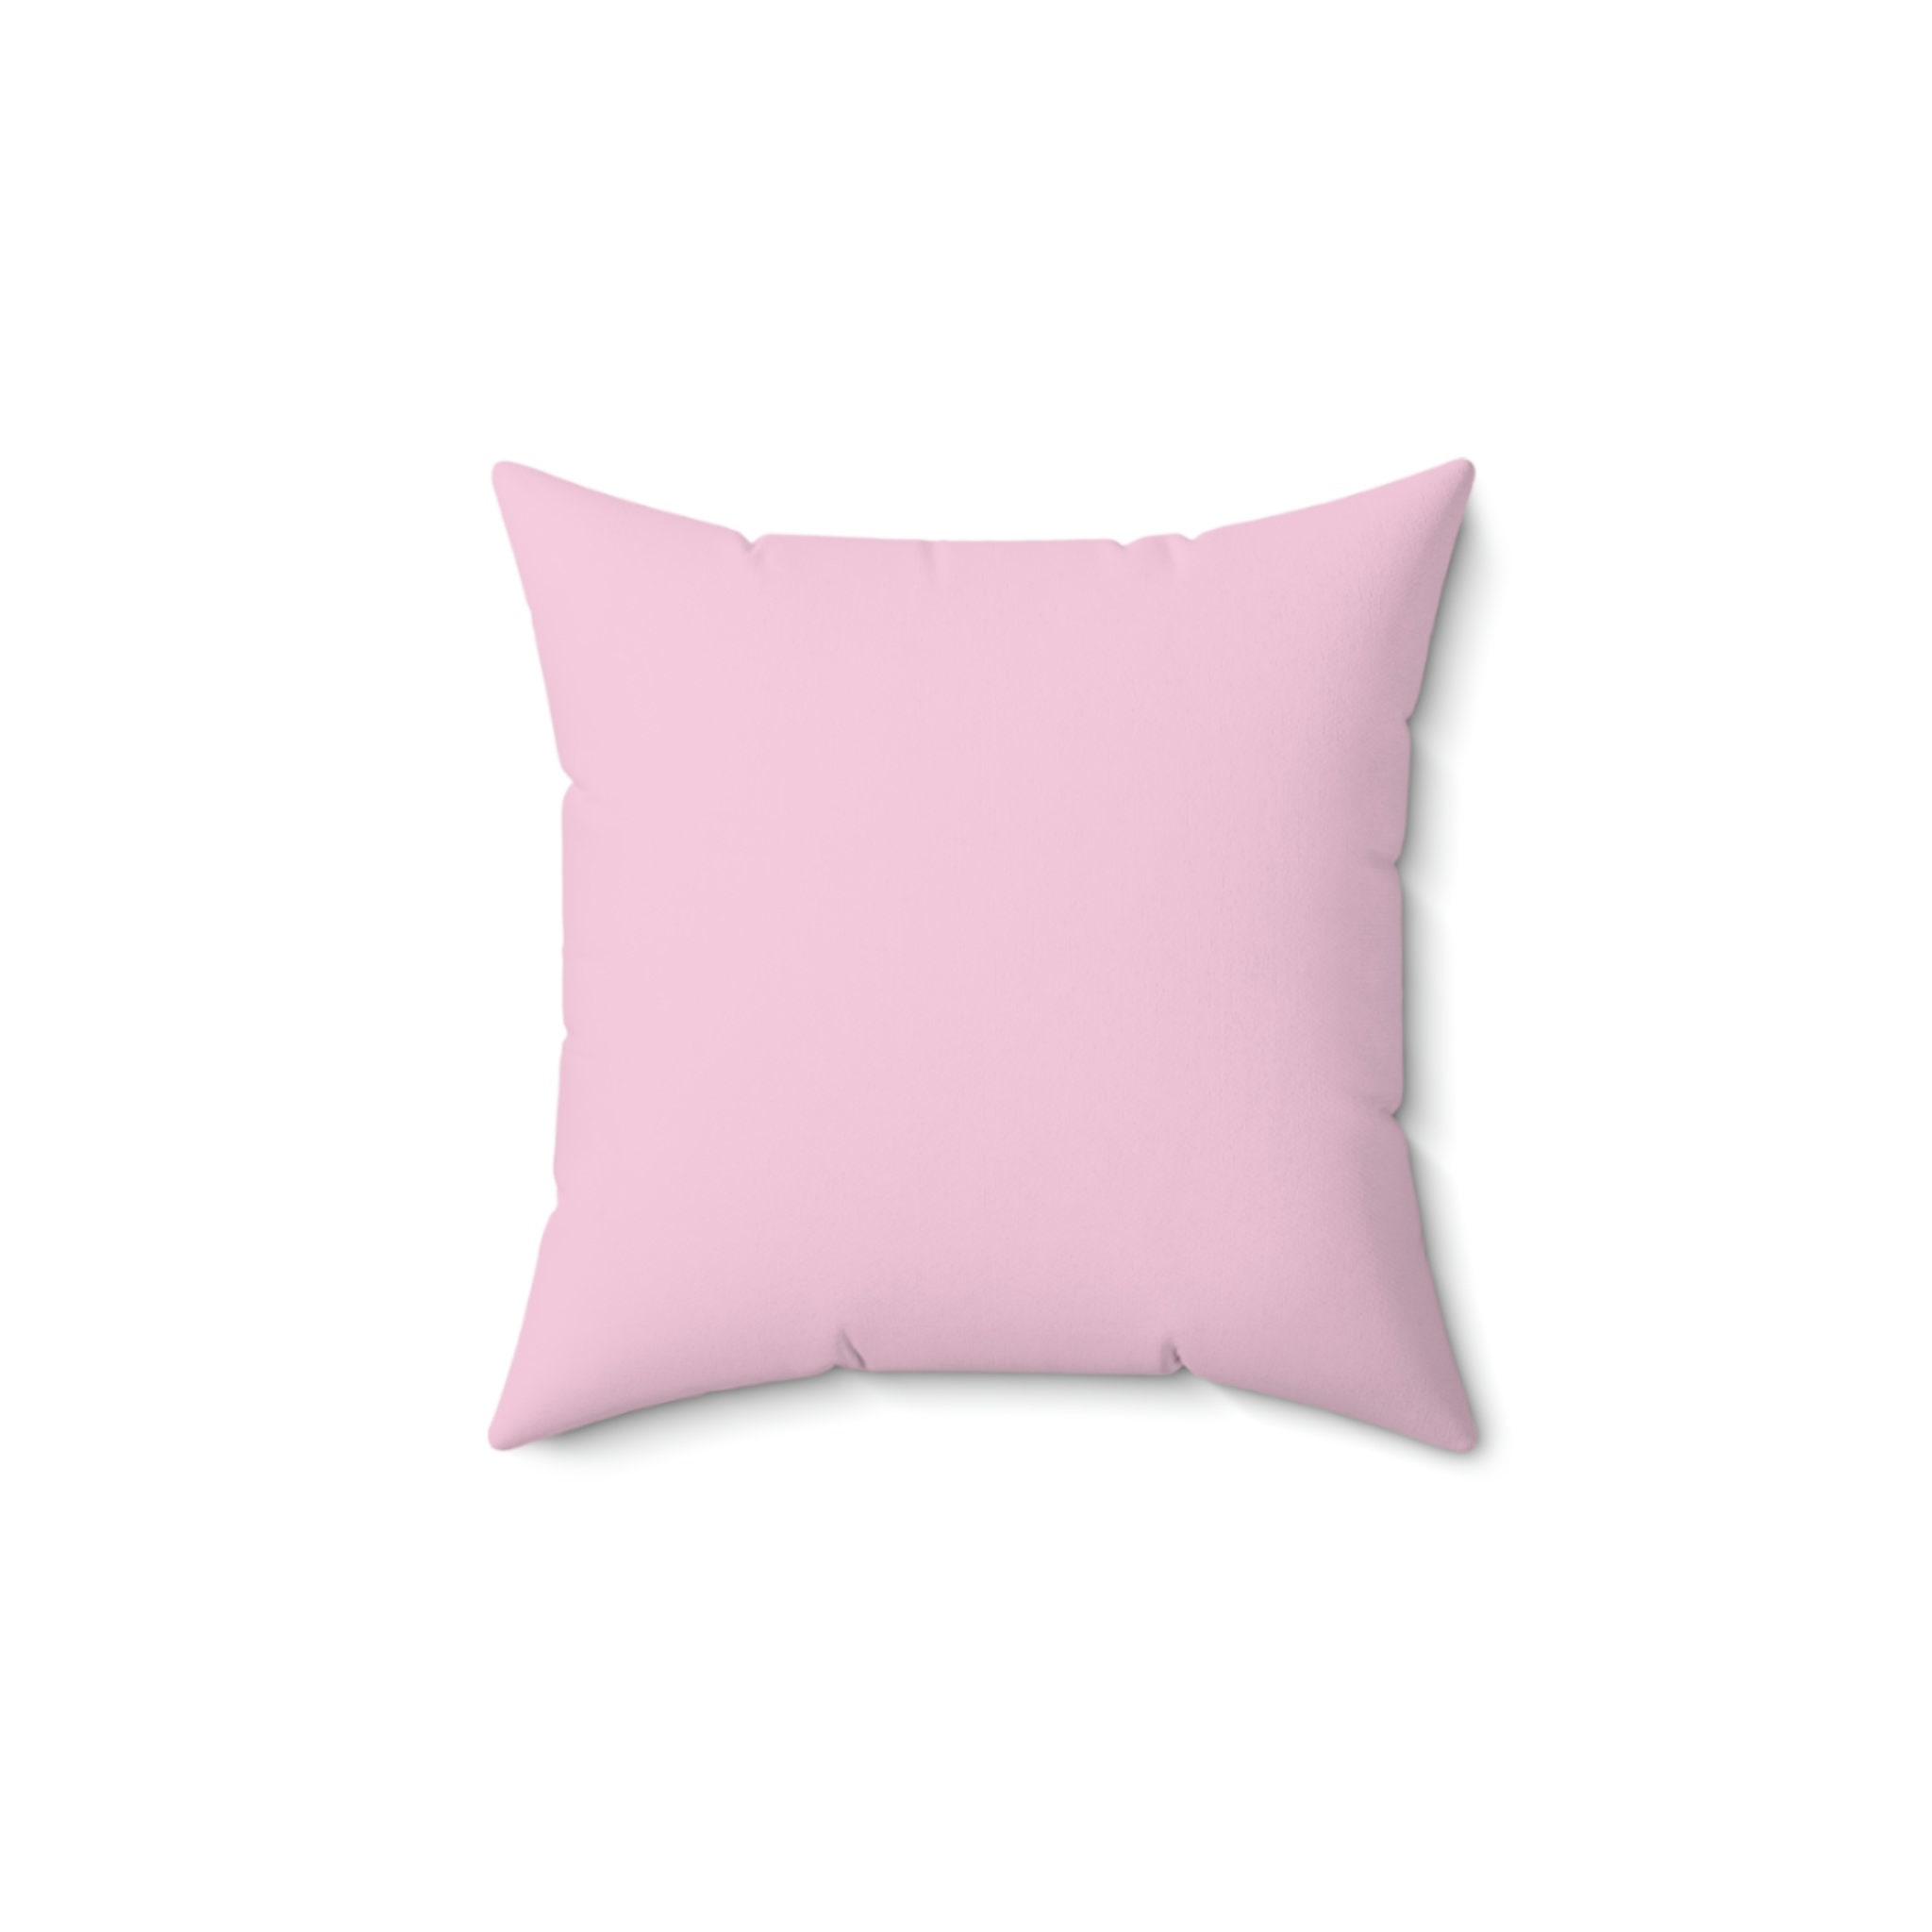 Y2K Aesthetic Fashion Girly Throw Pillow - Perfect Gift for Her